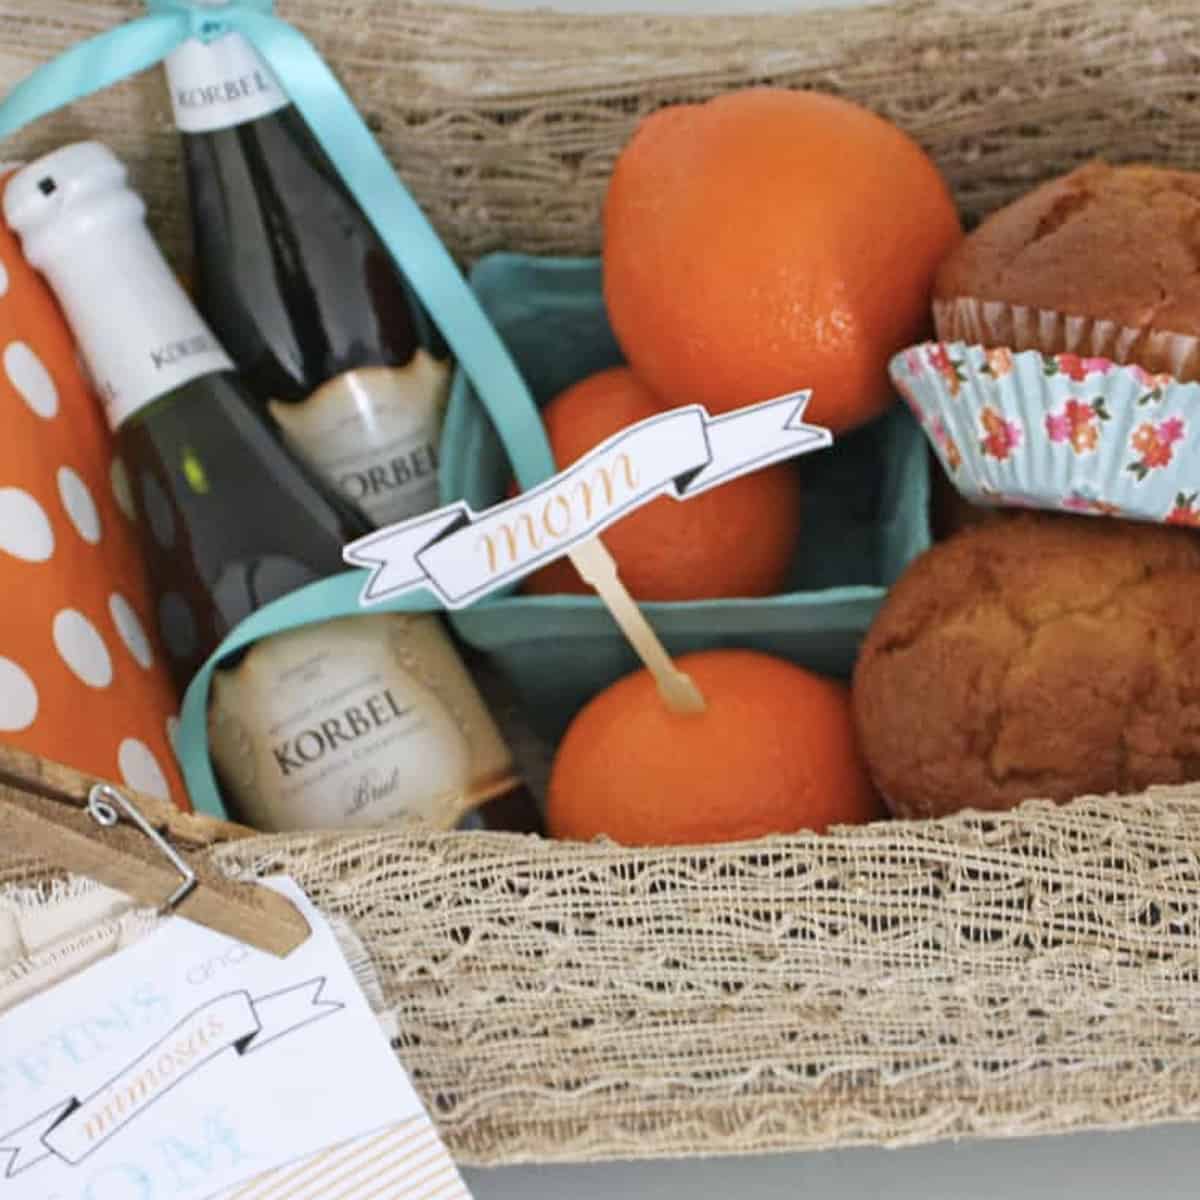 Unique Gifts for Mom  Meaningful Gift Ideas She'll Love! - Sunday Mimosas